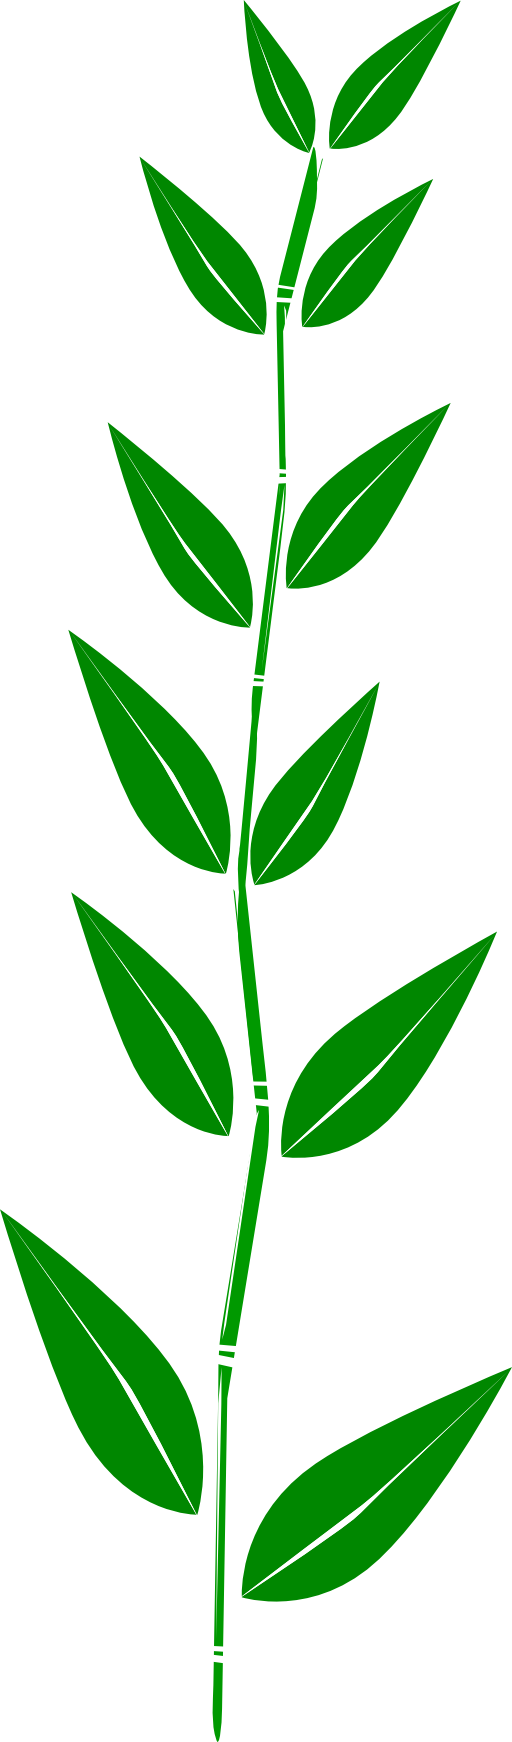 clipart for leaves - photo #39